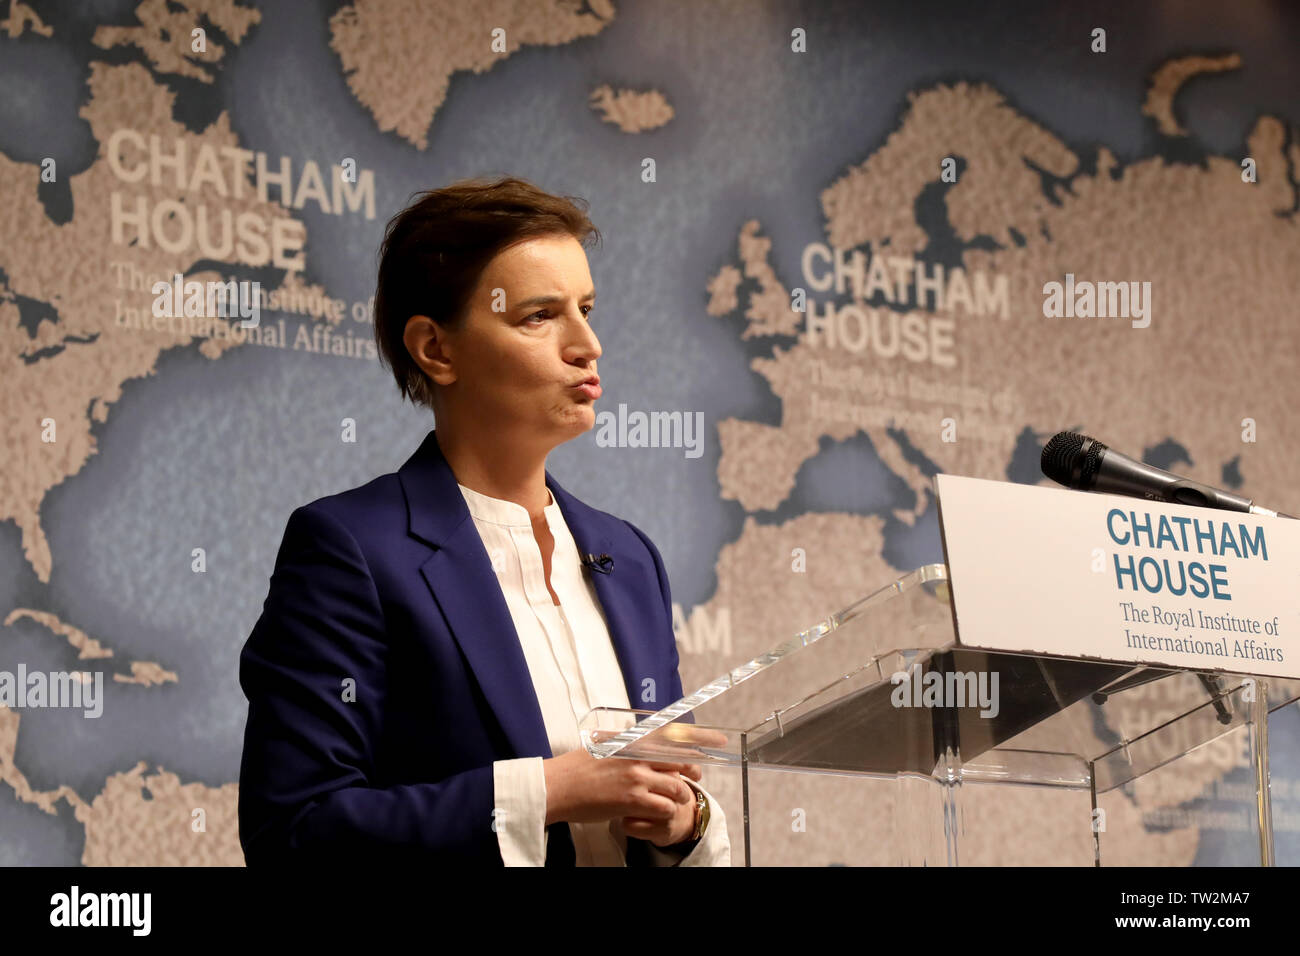 London / UK – June 18, 2019: Serbian prime minister Ana Brnabic speaking at Chatham House in London Stock Photo